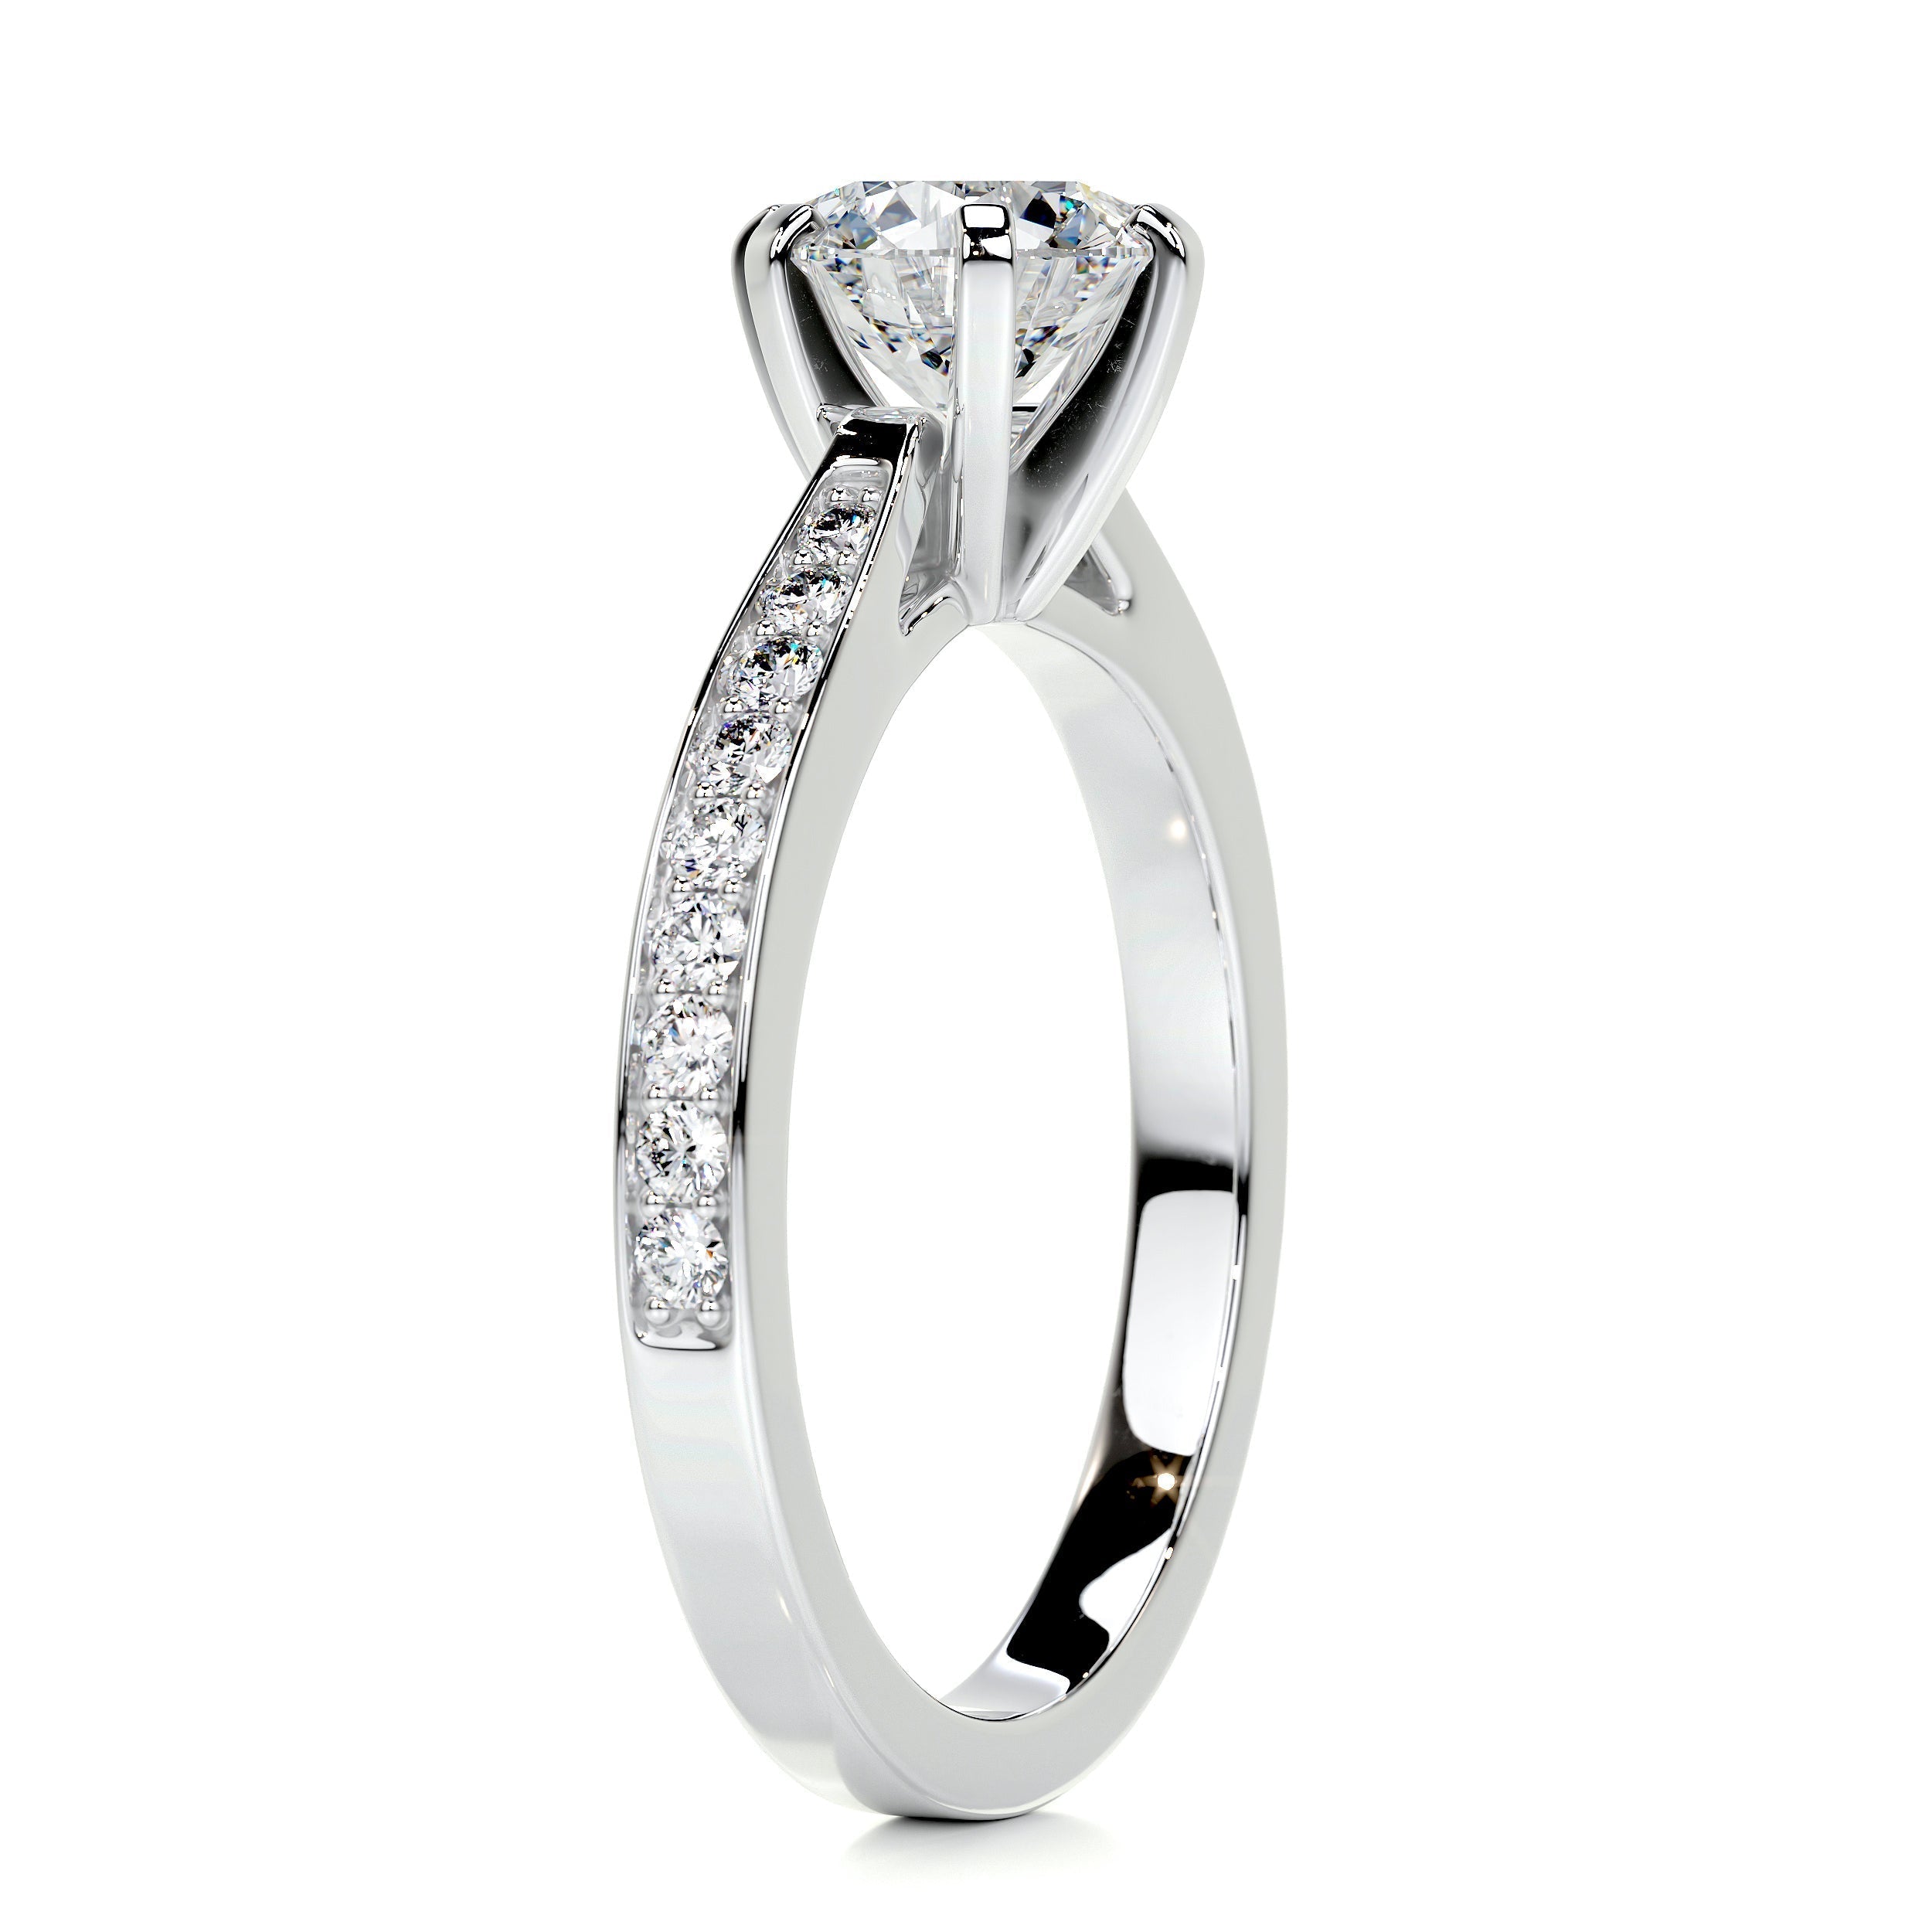 1.0 CT Round Solitaire CVD F/SI1 Diamond Engagement Ring 4